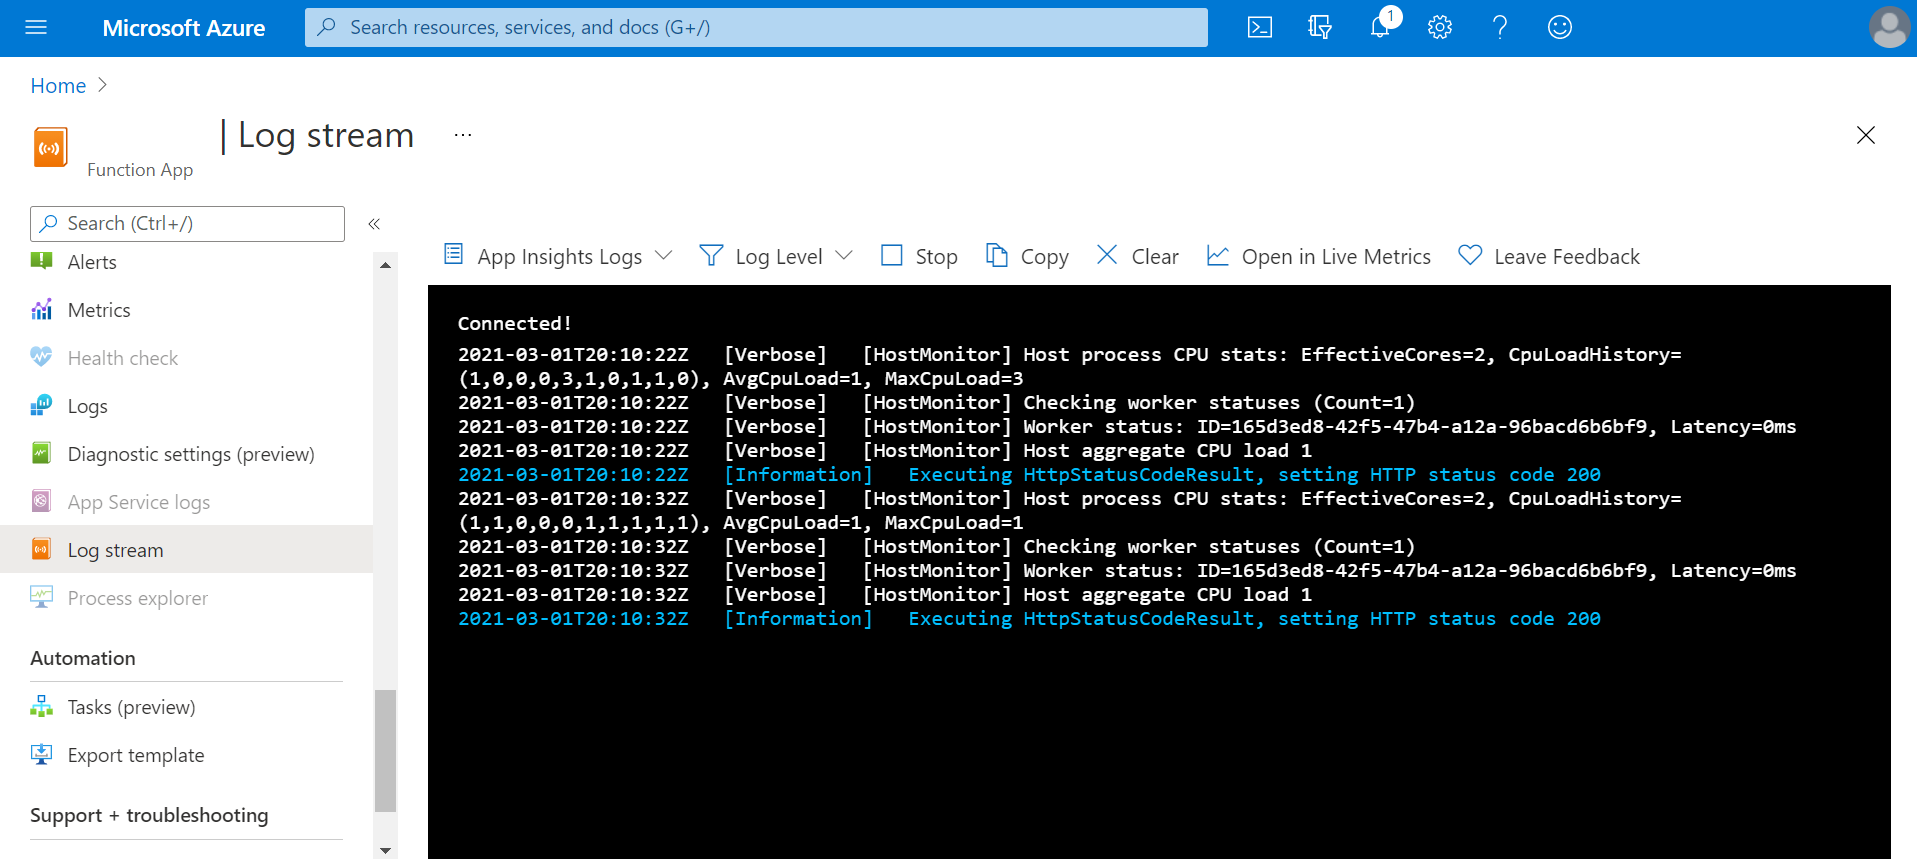 The log stream from within the Azure Portal